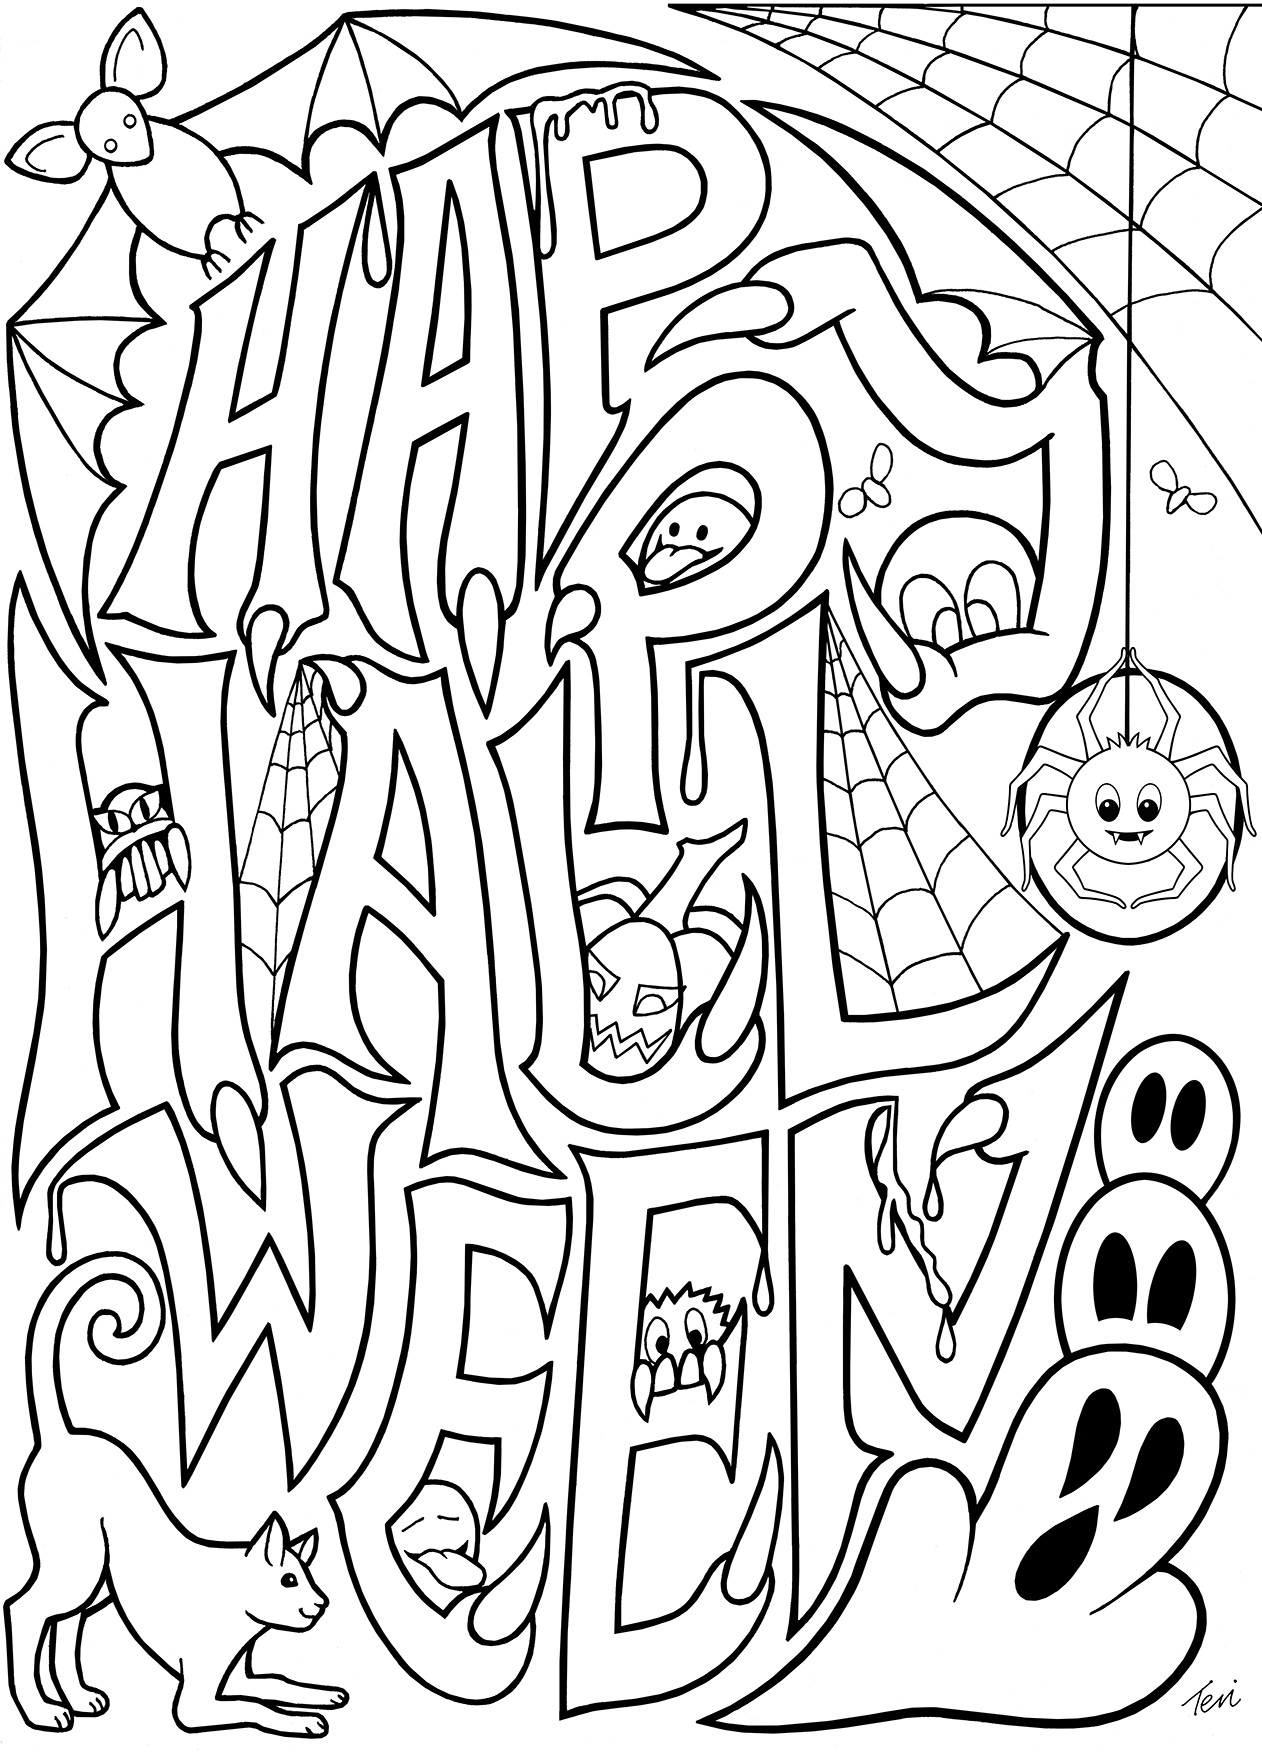 Free Halloween Printable Coloring Pages
 Free Adult Coloring Book Pages Happy Halloween by Blue